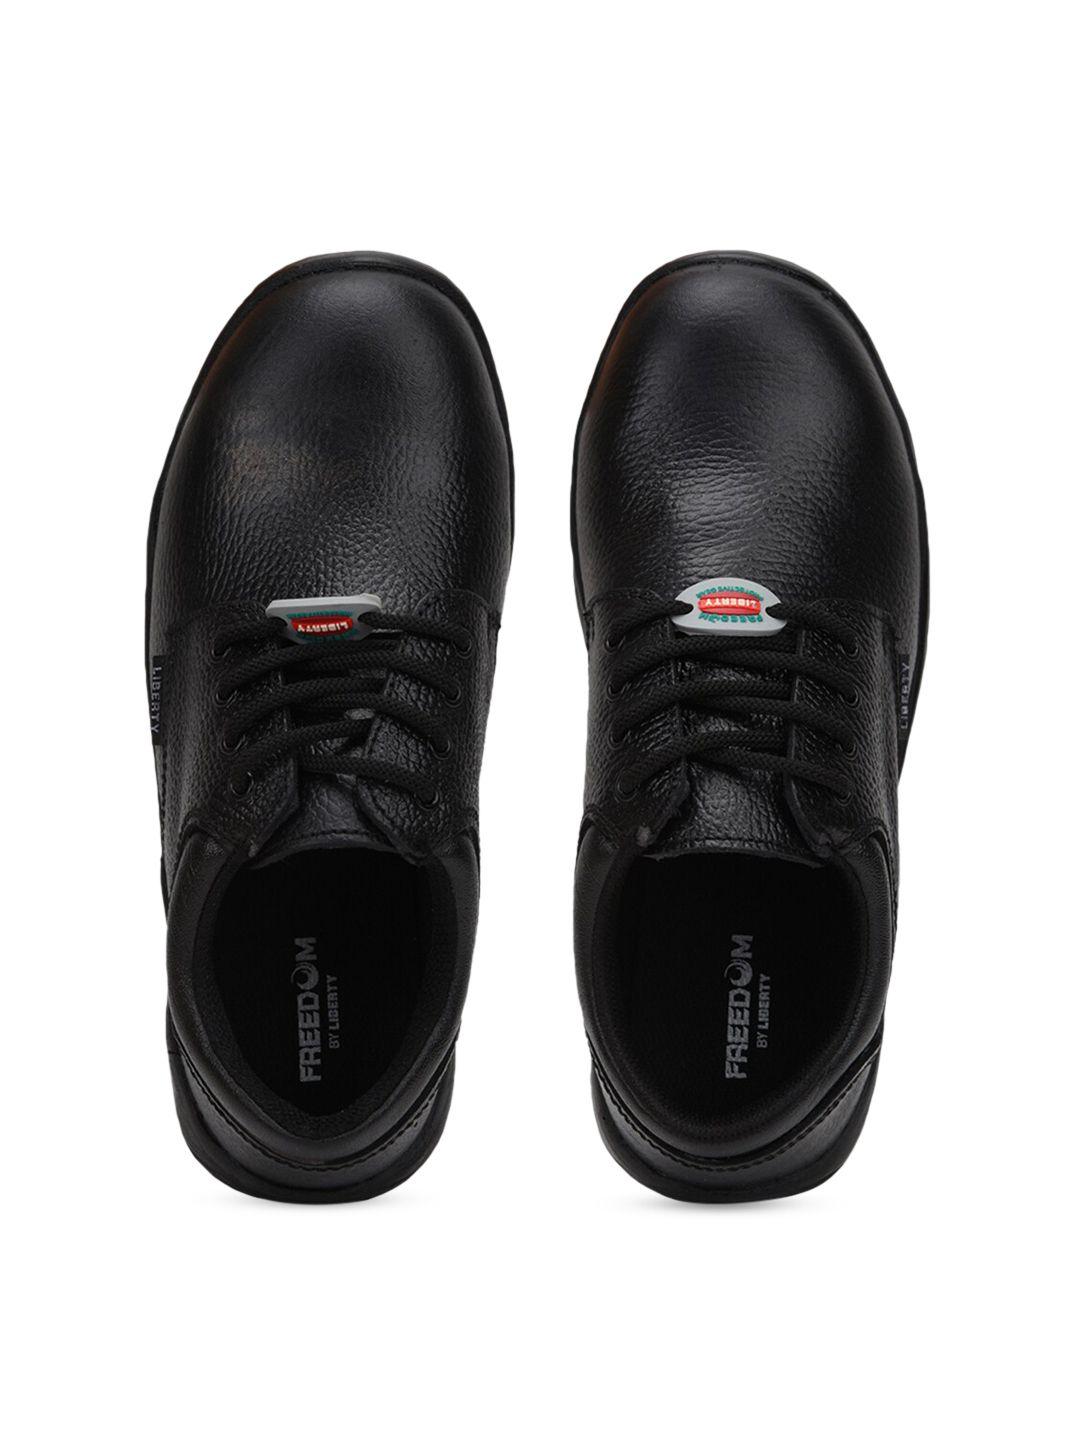 liberty men black textured leather shoes